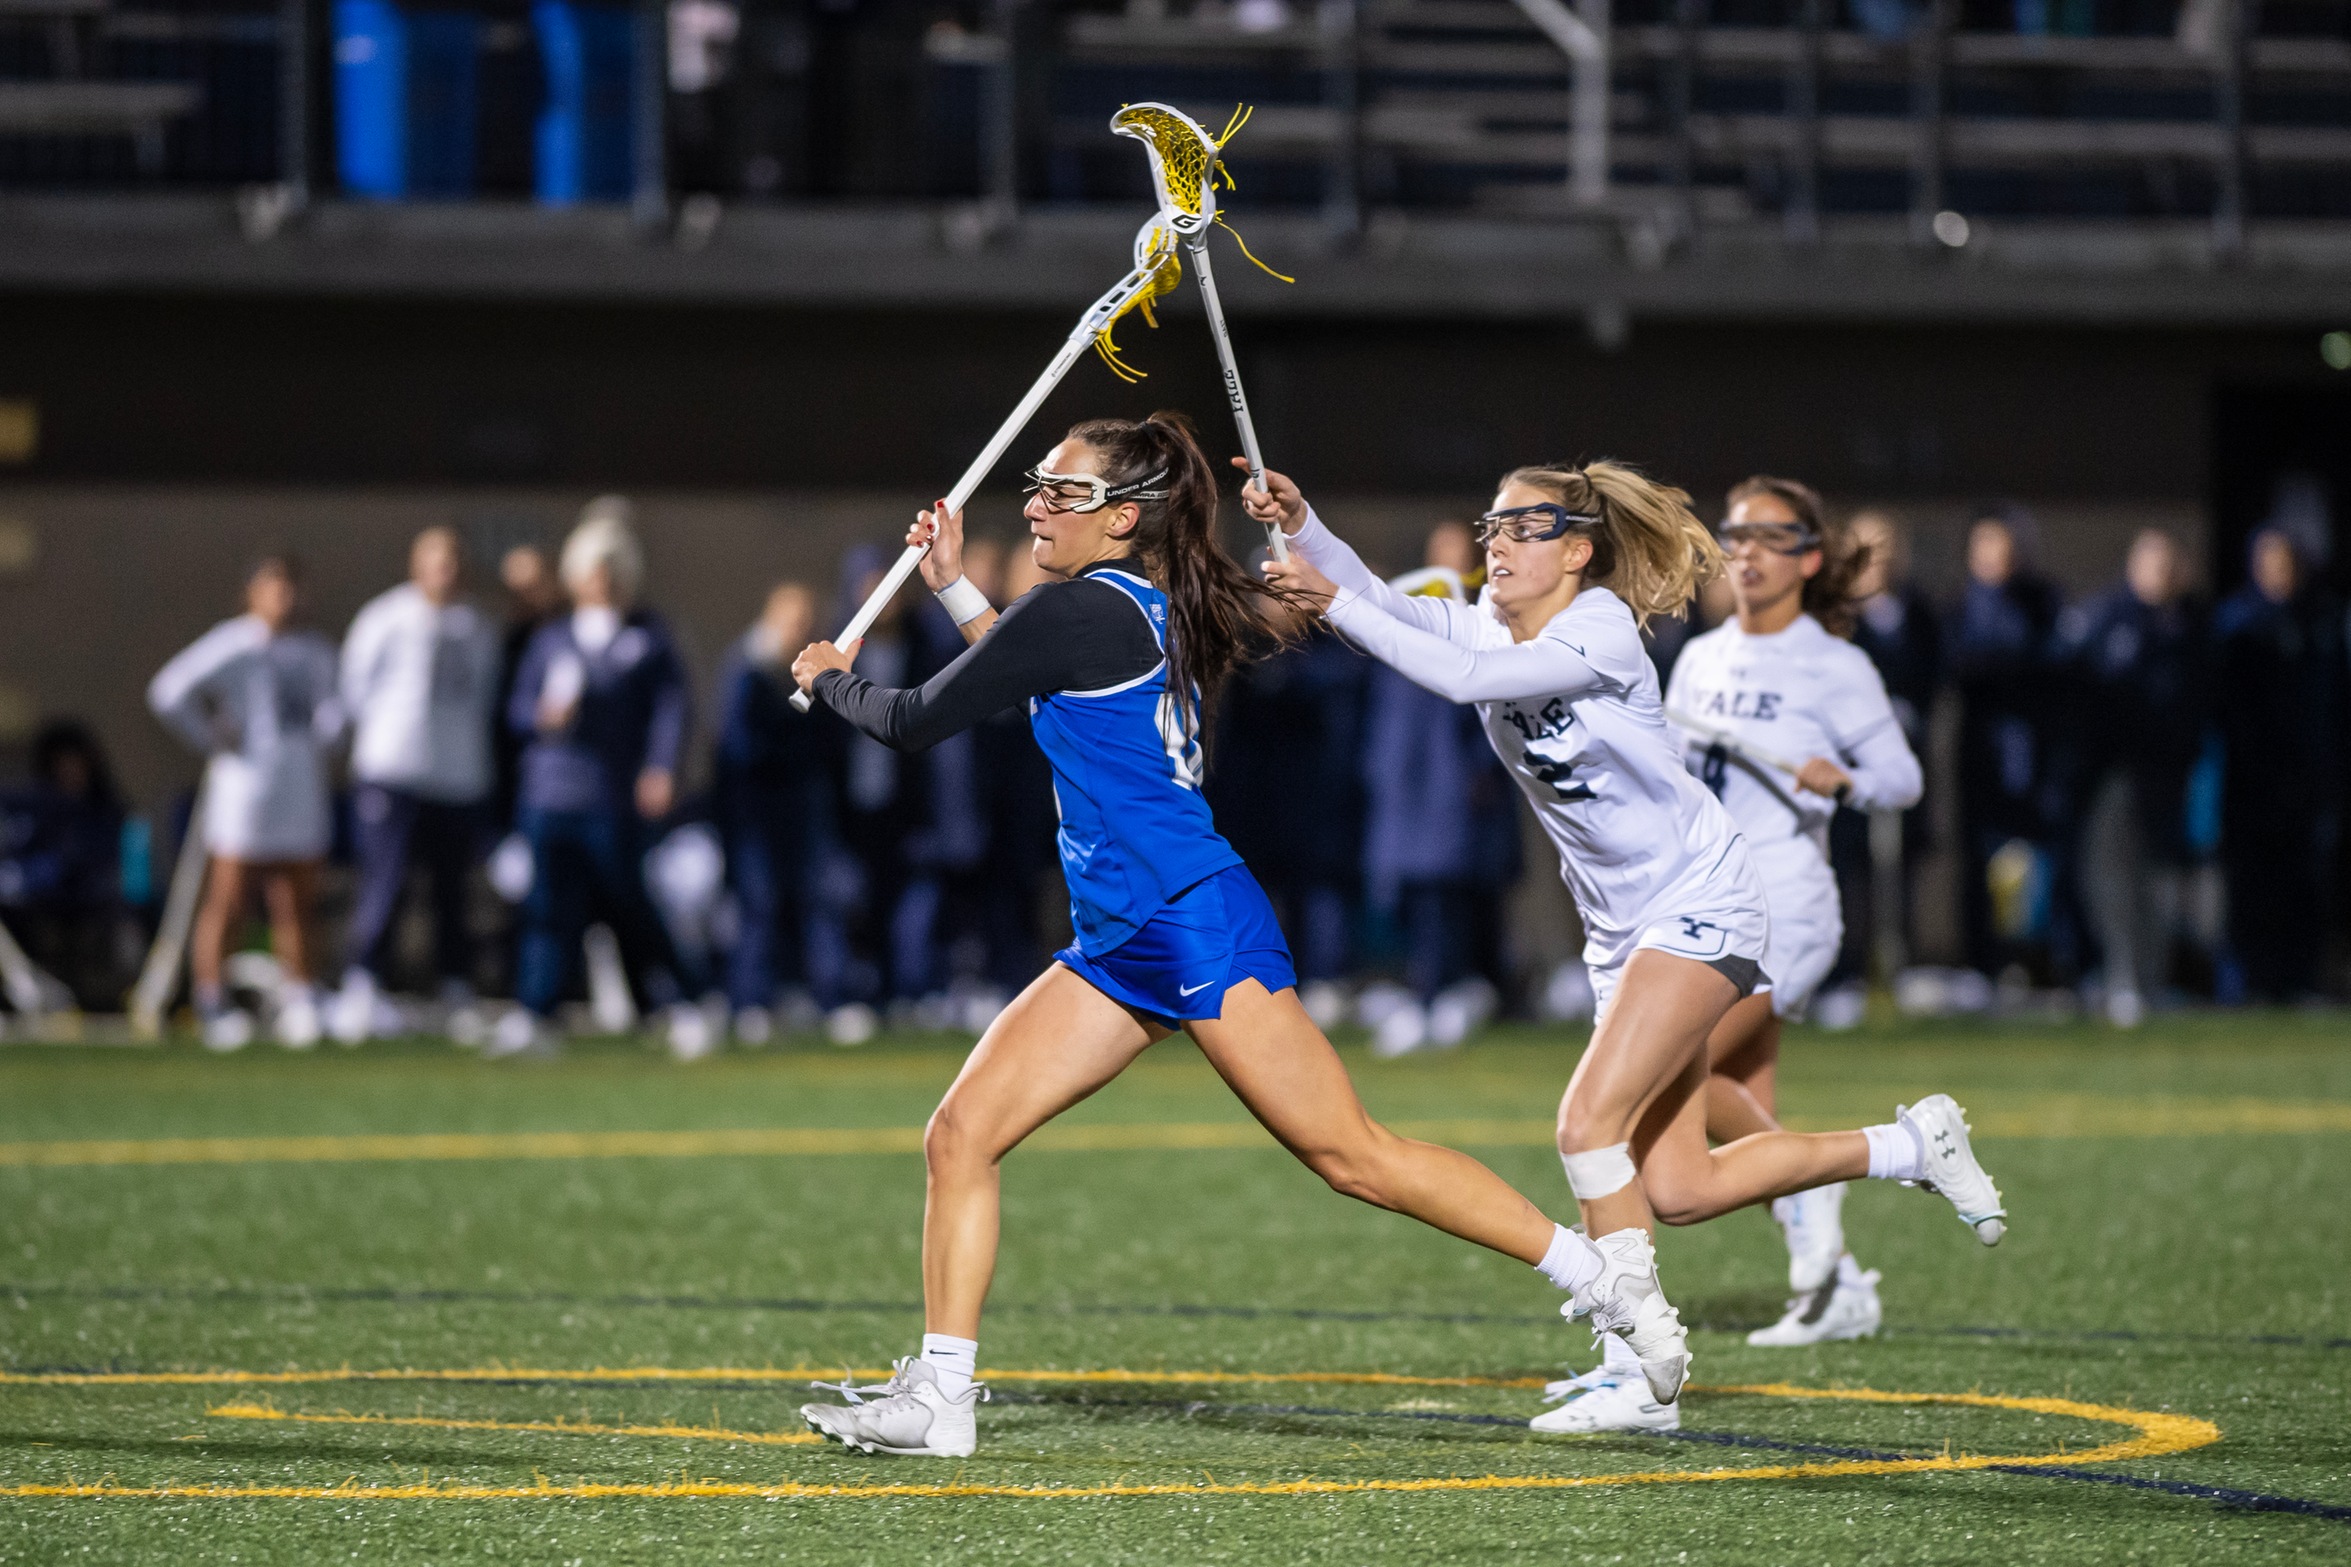 Olivia Gianakos scored four times in the Blue Devils home game versus Stetson on March 27. (Photo: Steve McLaughlin)